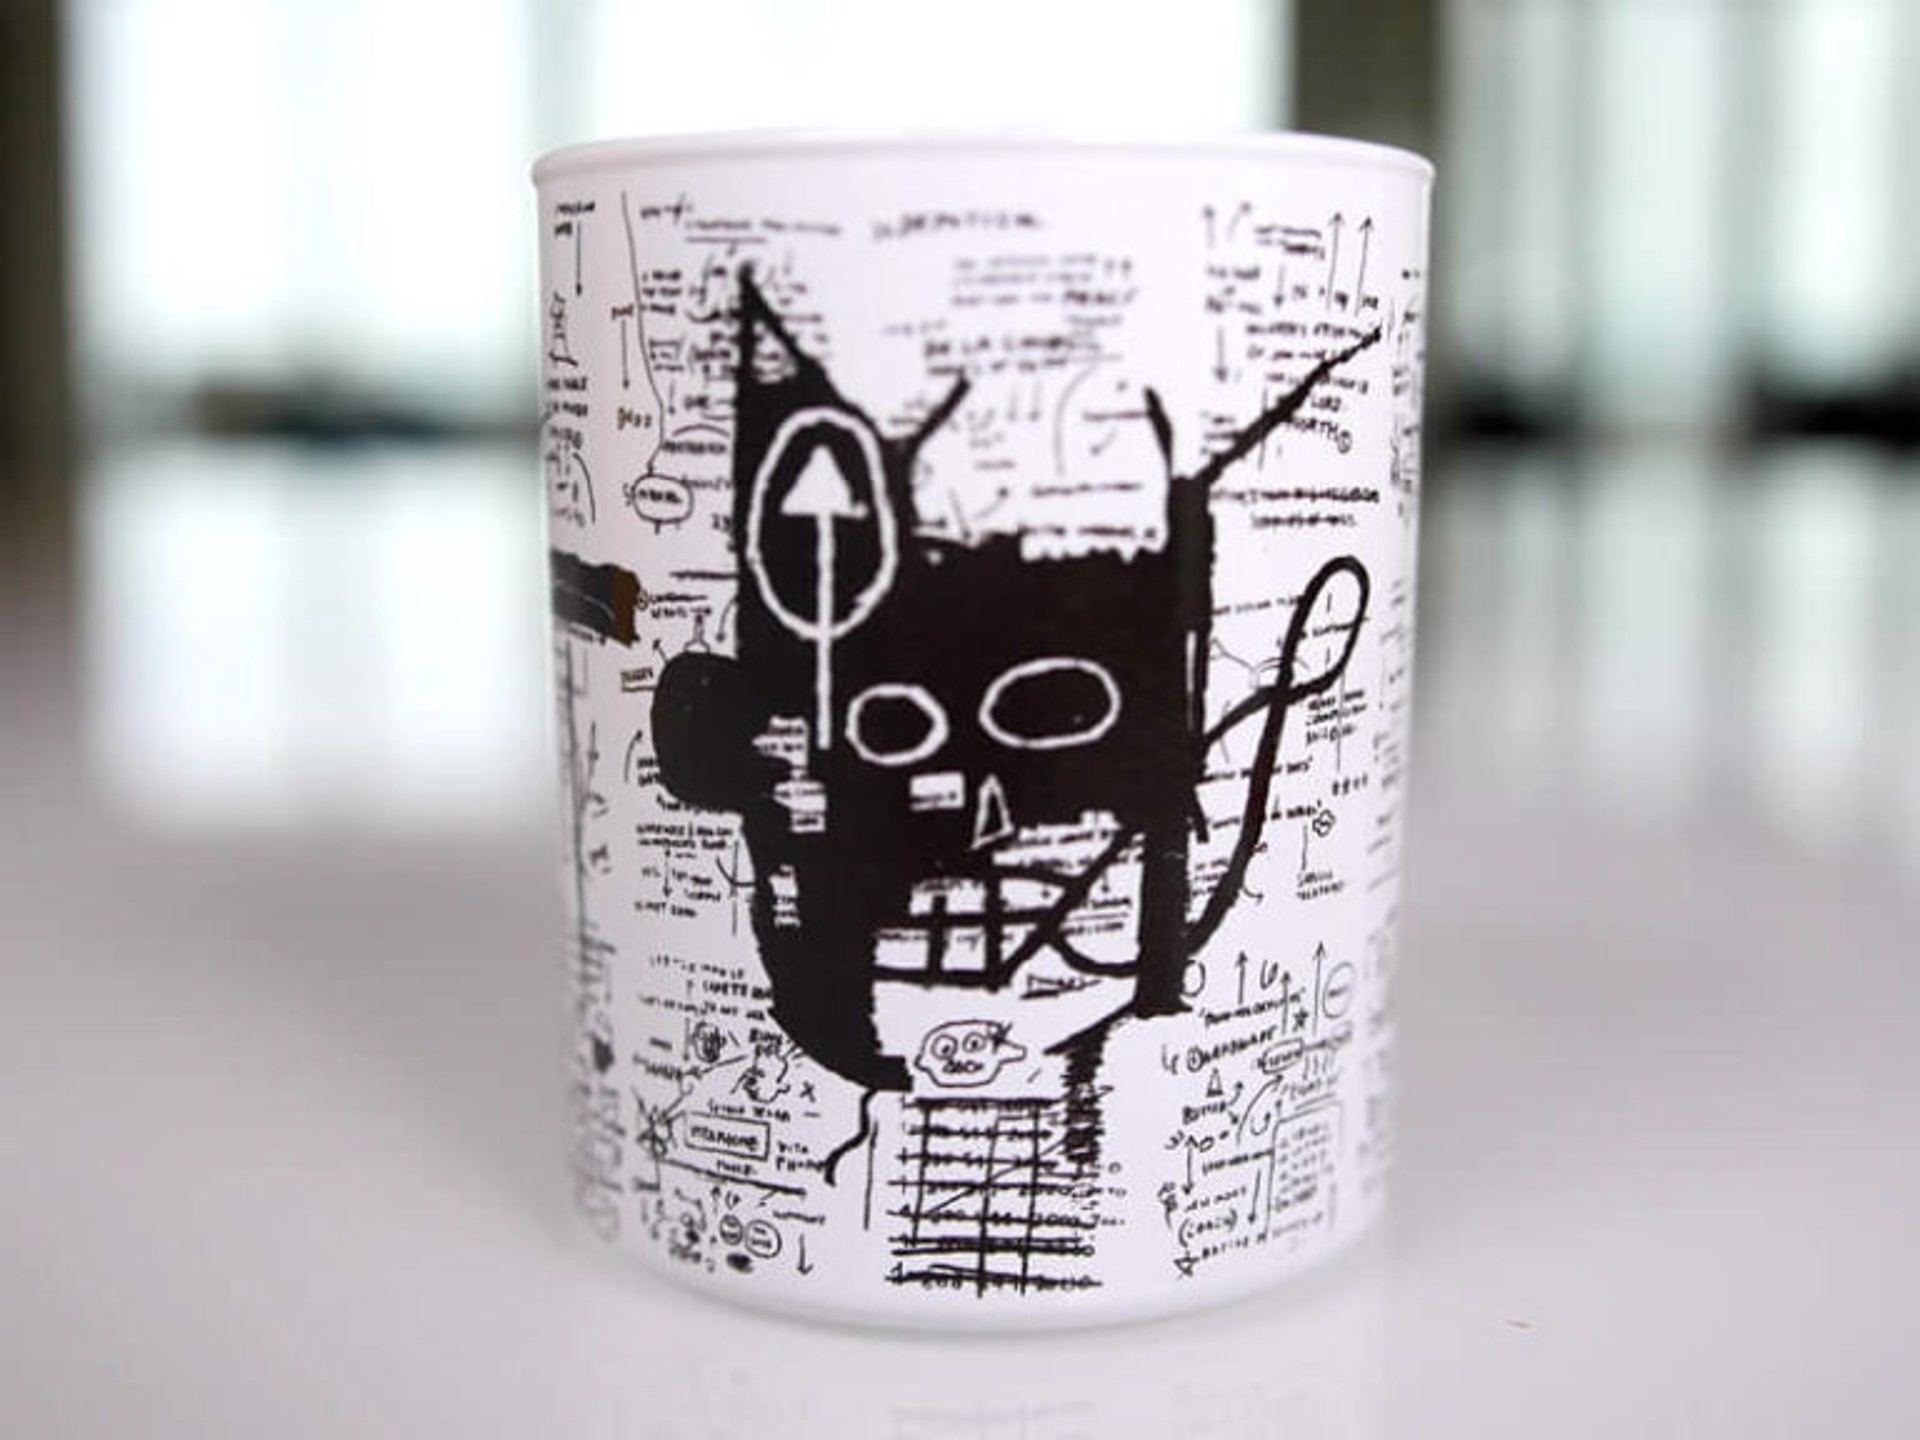 Return of the Central Figure Scented Candle by Jean-Michel Basquiat